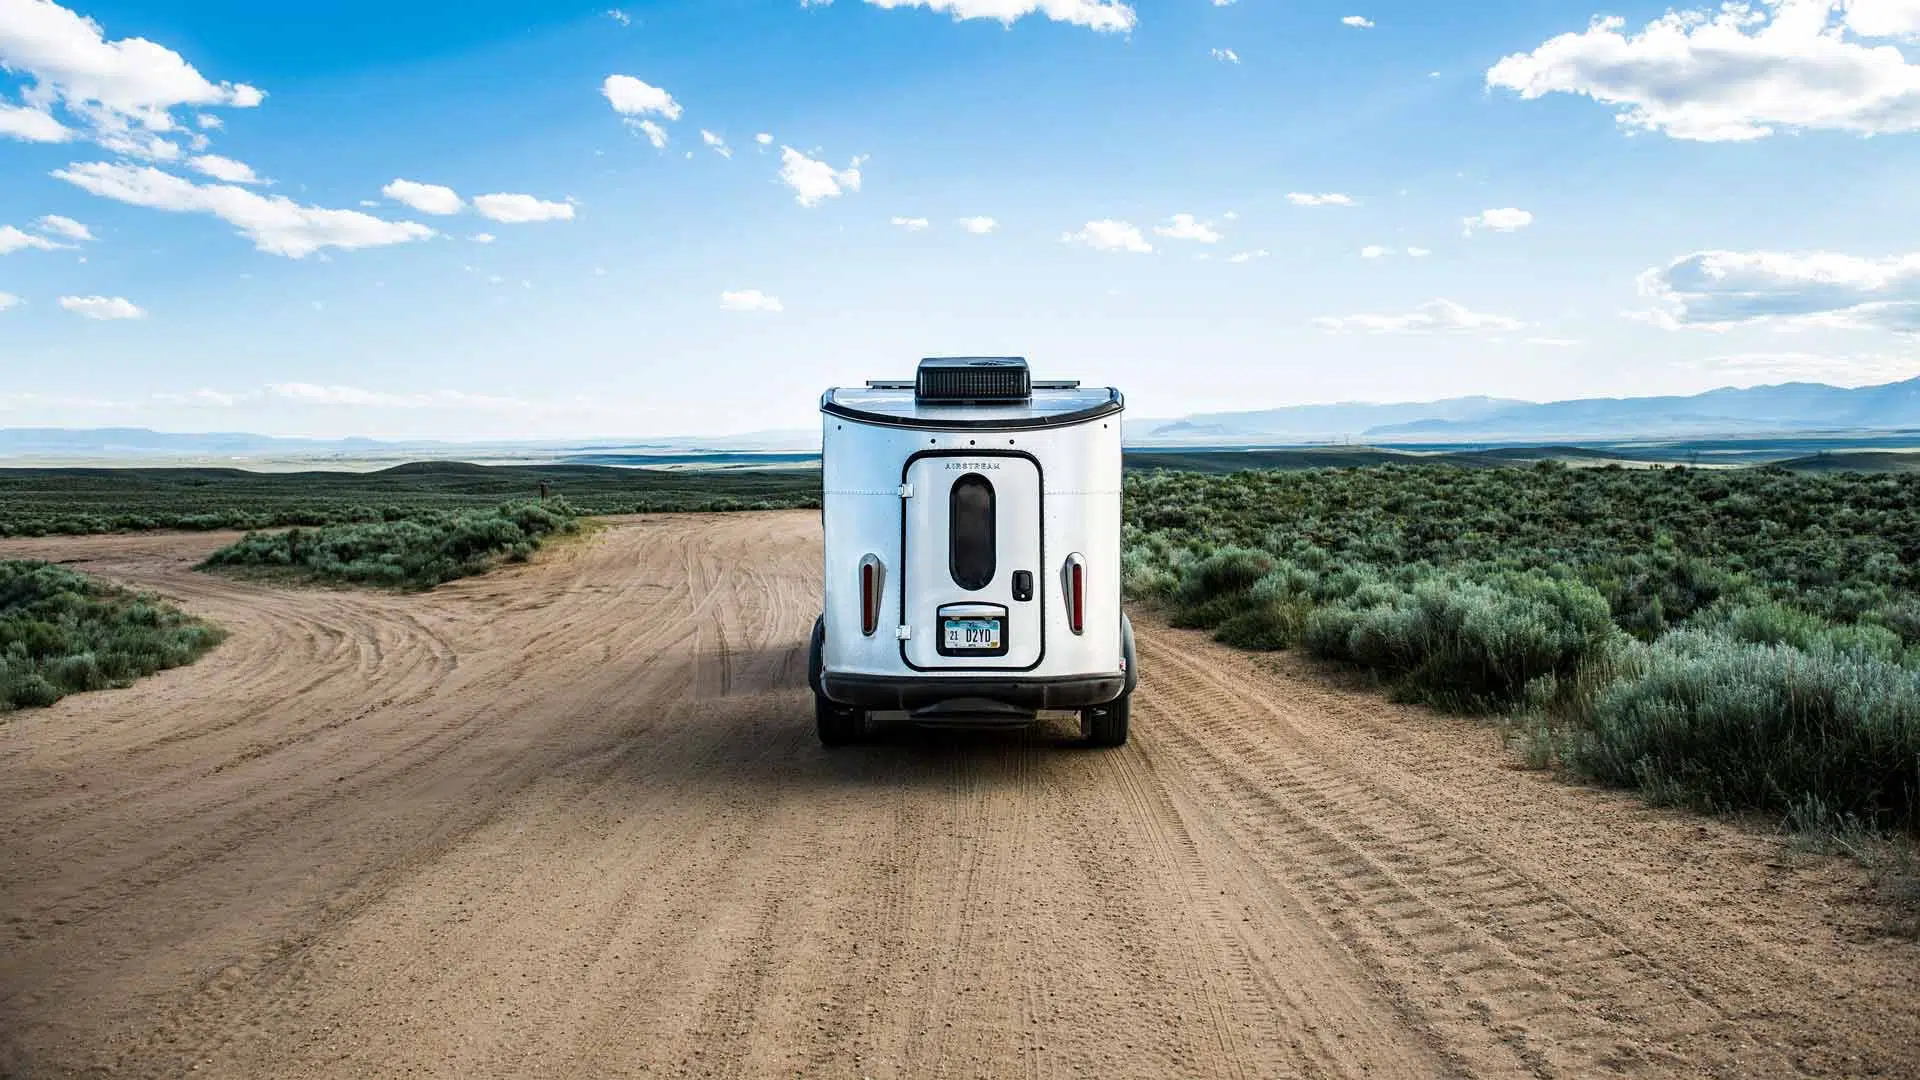 Airstream Basecamp on Dirt Road in Front of Blue Sky